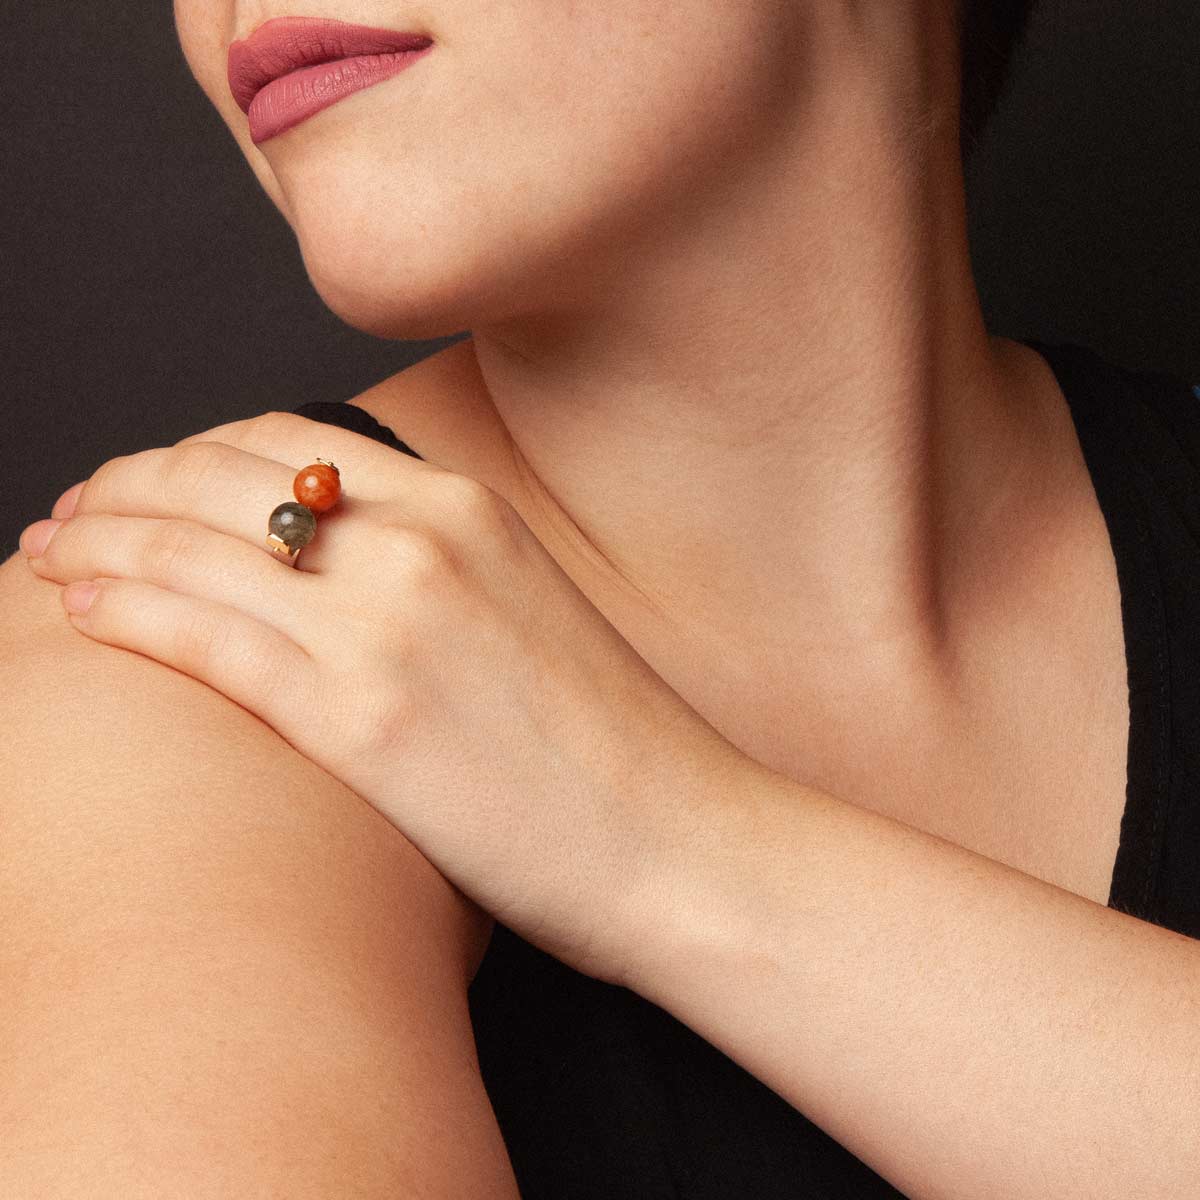 Lua handcrafted ring in 9k or 18k gold, sterling silver, carnelian agate and rutilated quartz designed by Belen Bajo m1